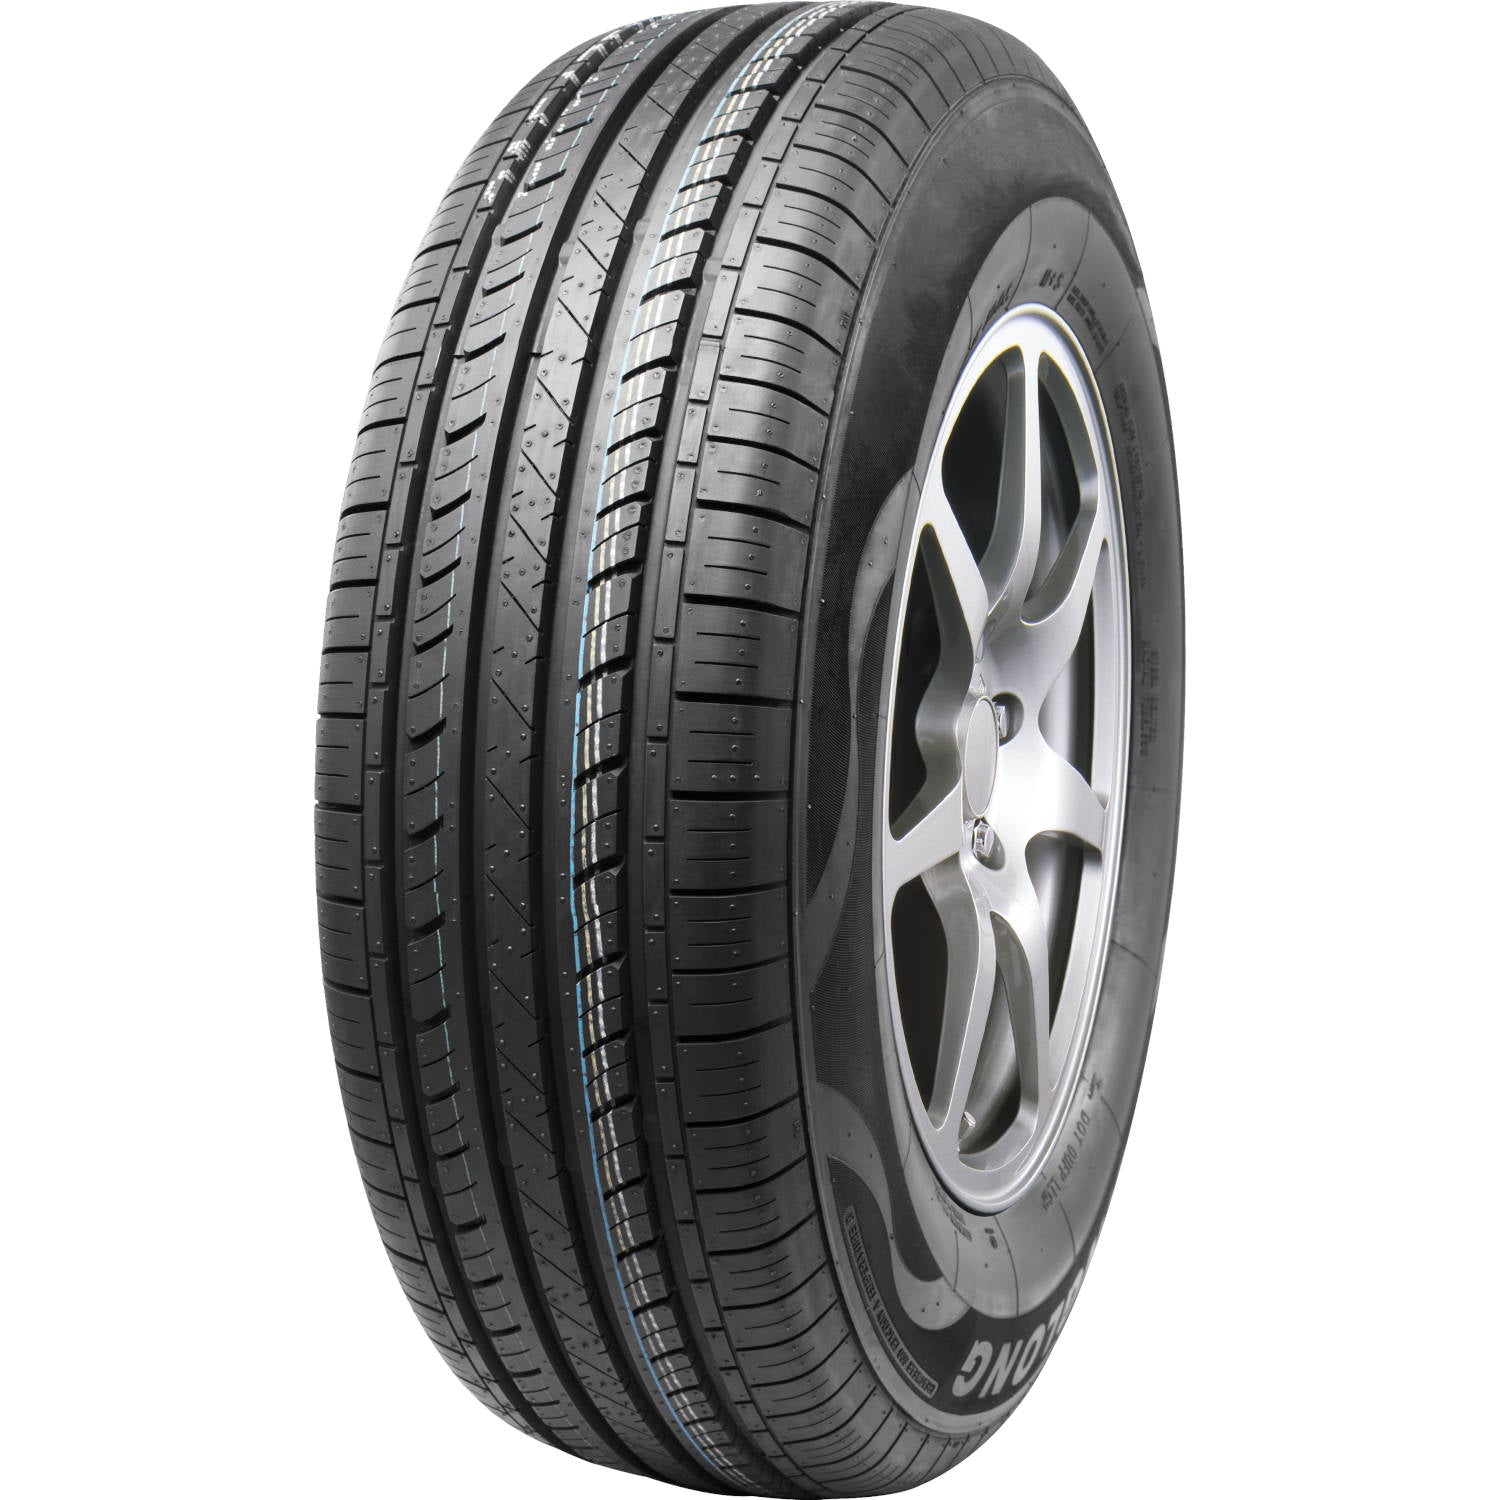 ROAD ONE CAVALRY A/S 225/60R16 (26.6X8.9R 16) Tires